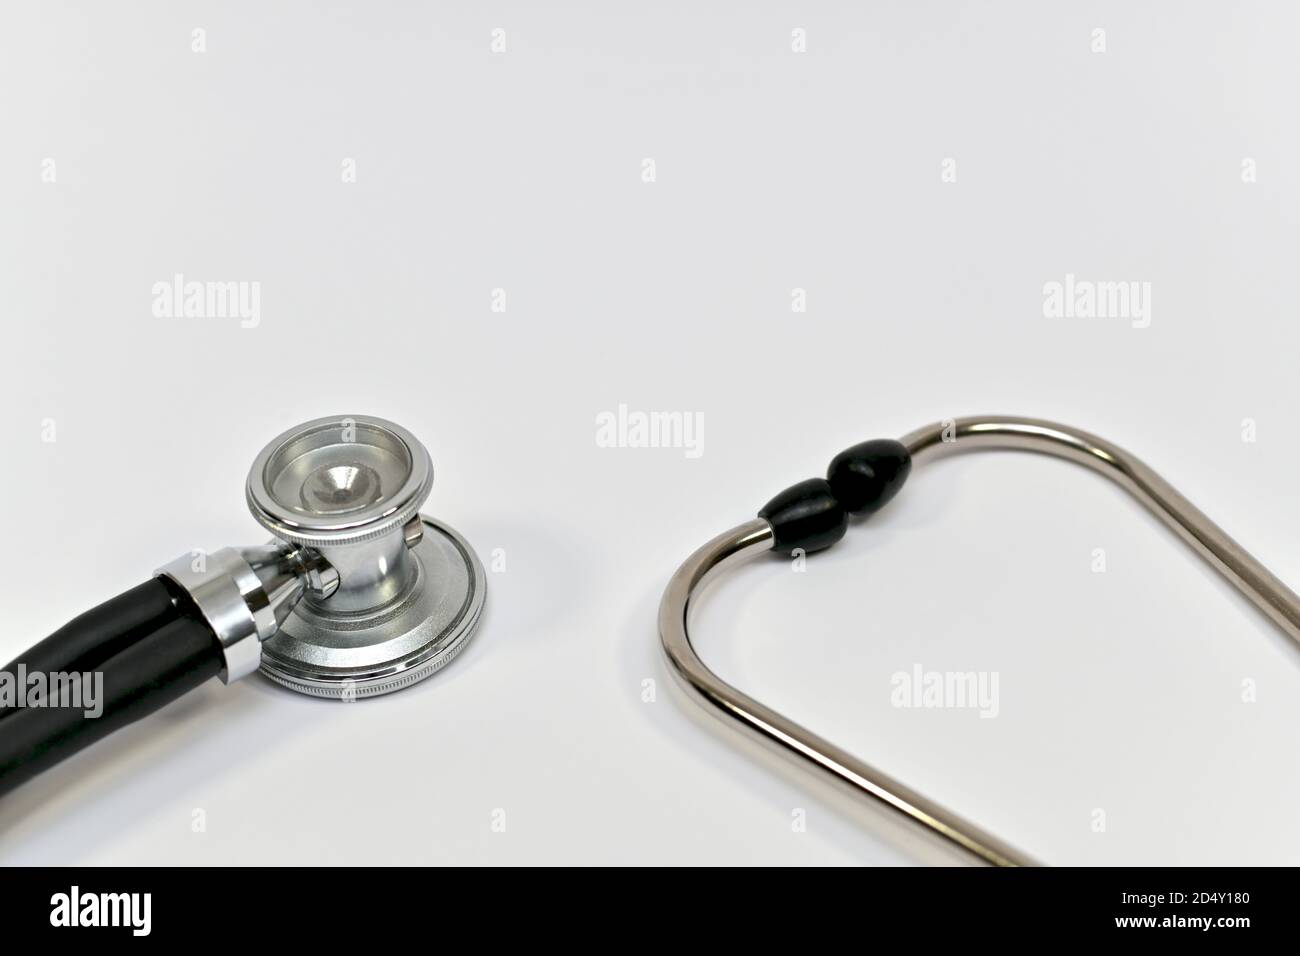 Two ends of a stethoscope, fragment closeup against a light background.  Stock Photo